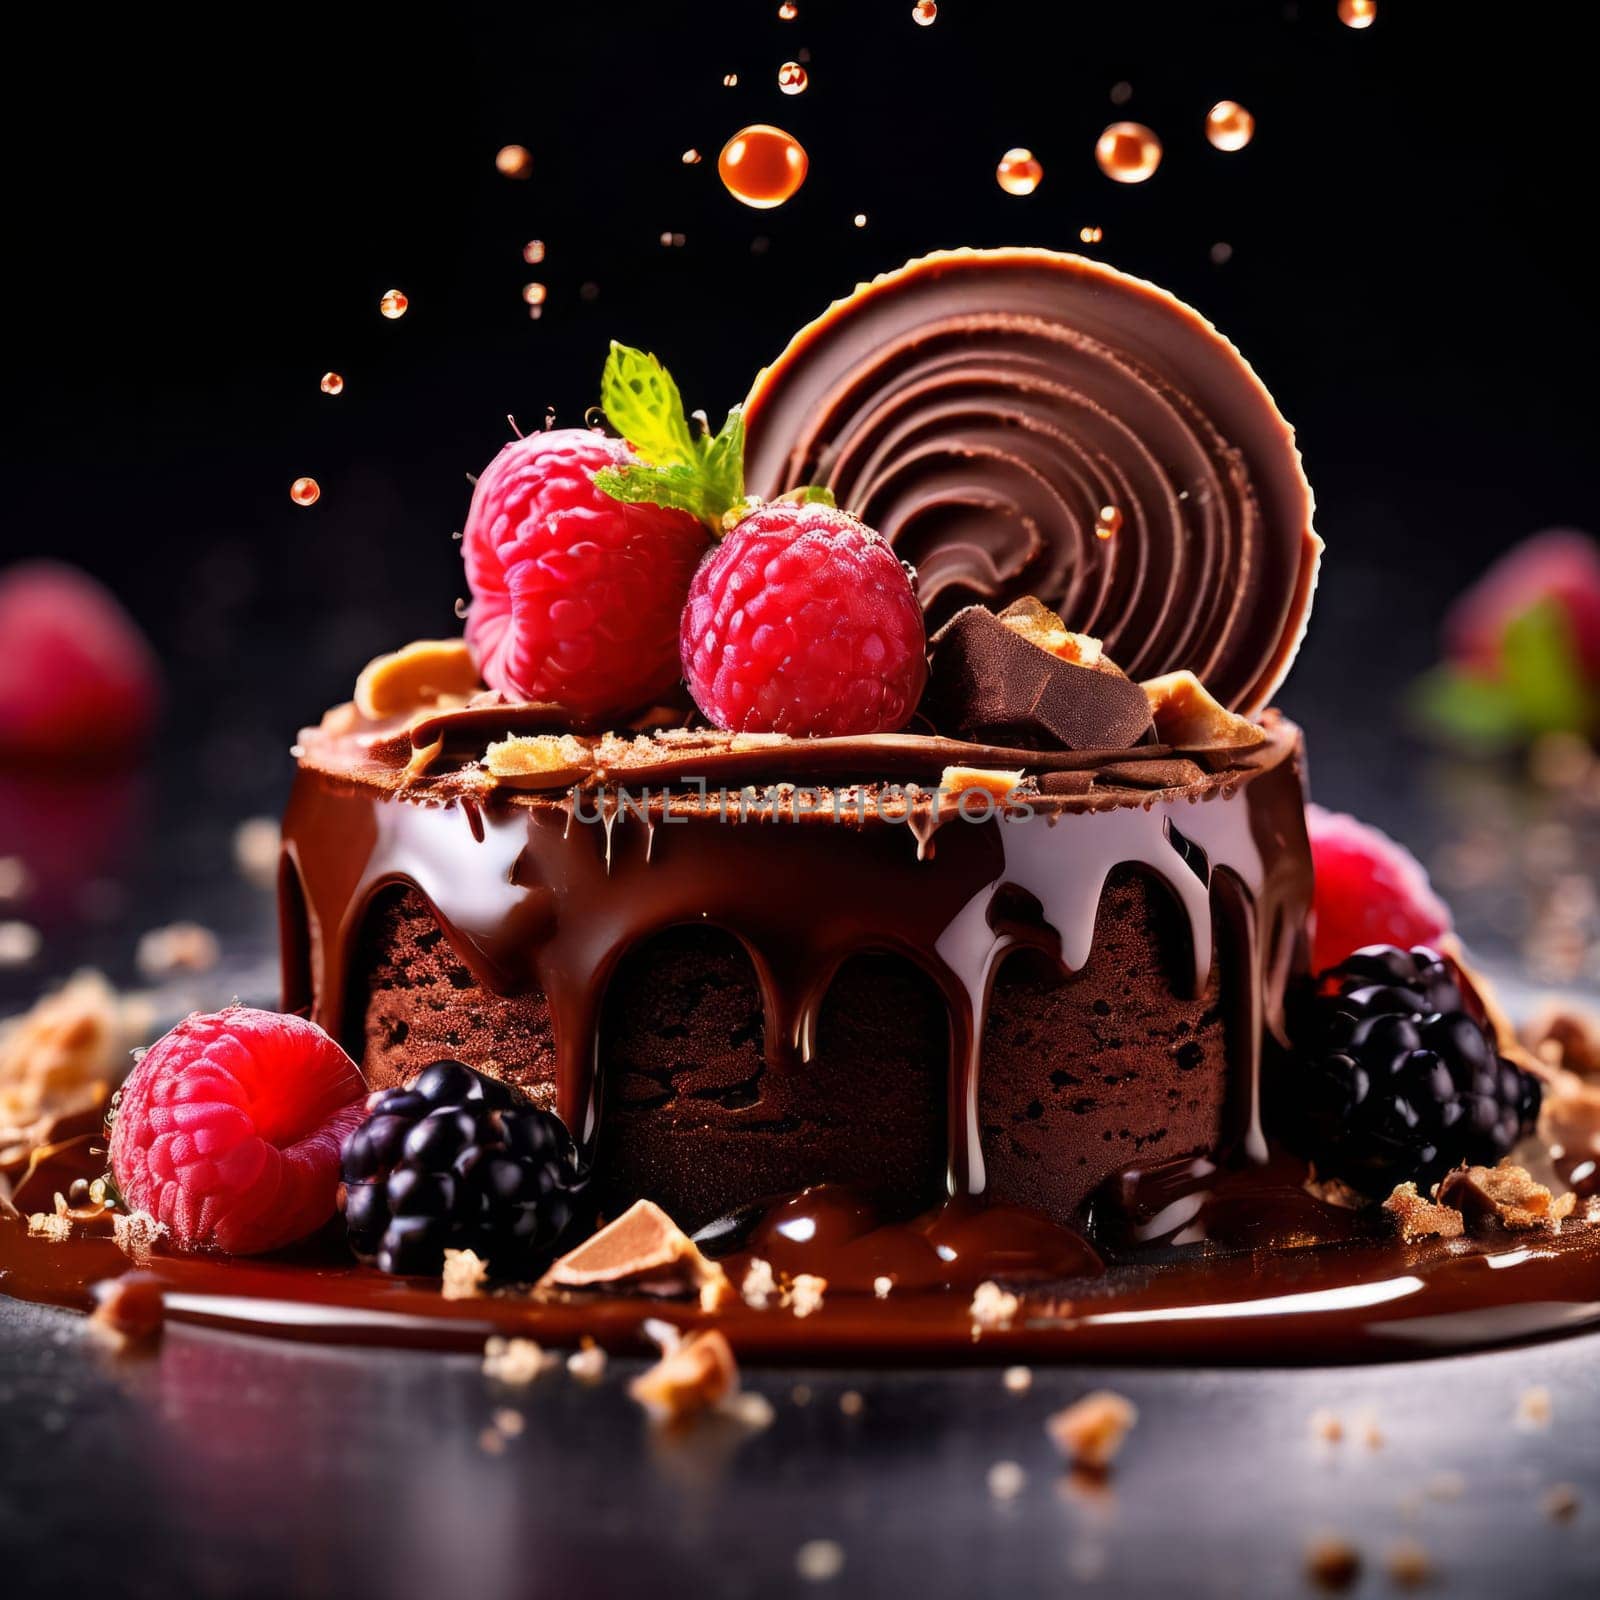 Decadent chocolate cake adorned with fresh berries, drizzled with rich chocolate sauce. For advertising bakery products, cafe, restaurant menus, culinary books, food blogs, website of pastry shop. by Angelsmoon